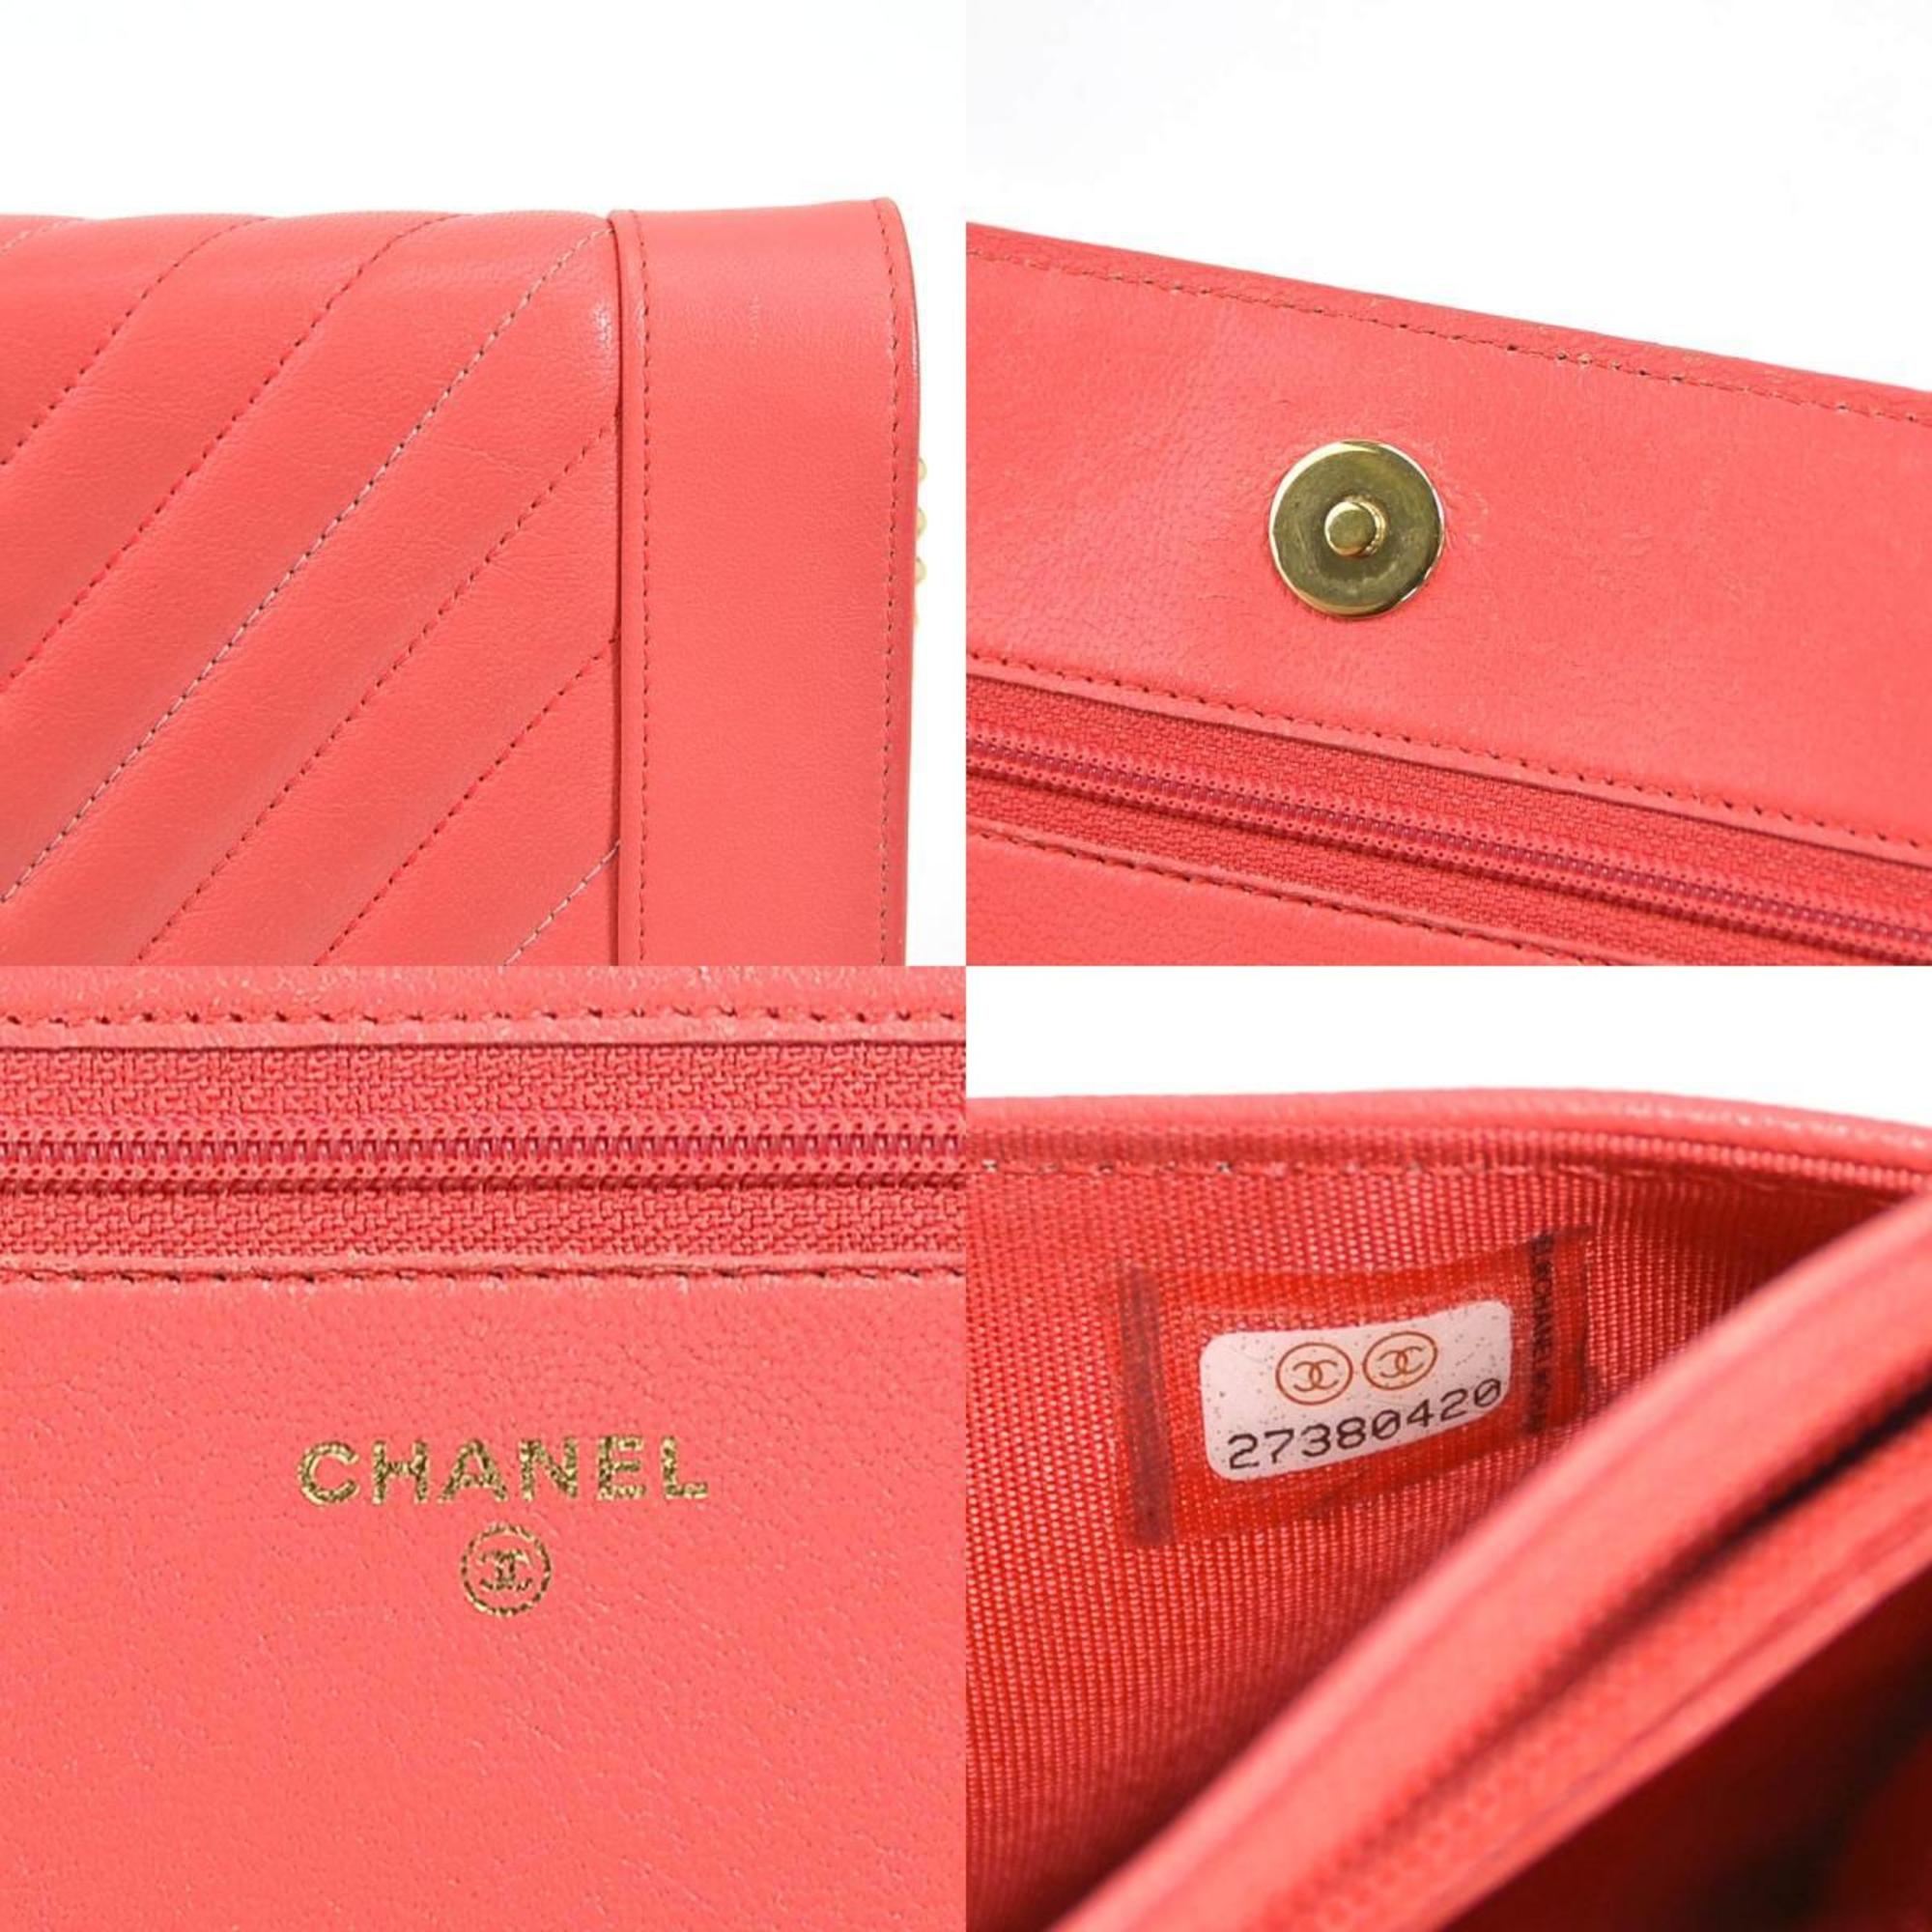 CHANEL Wallet Chain V Stitch Leather/Metal Pink/Gold Ladies